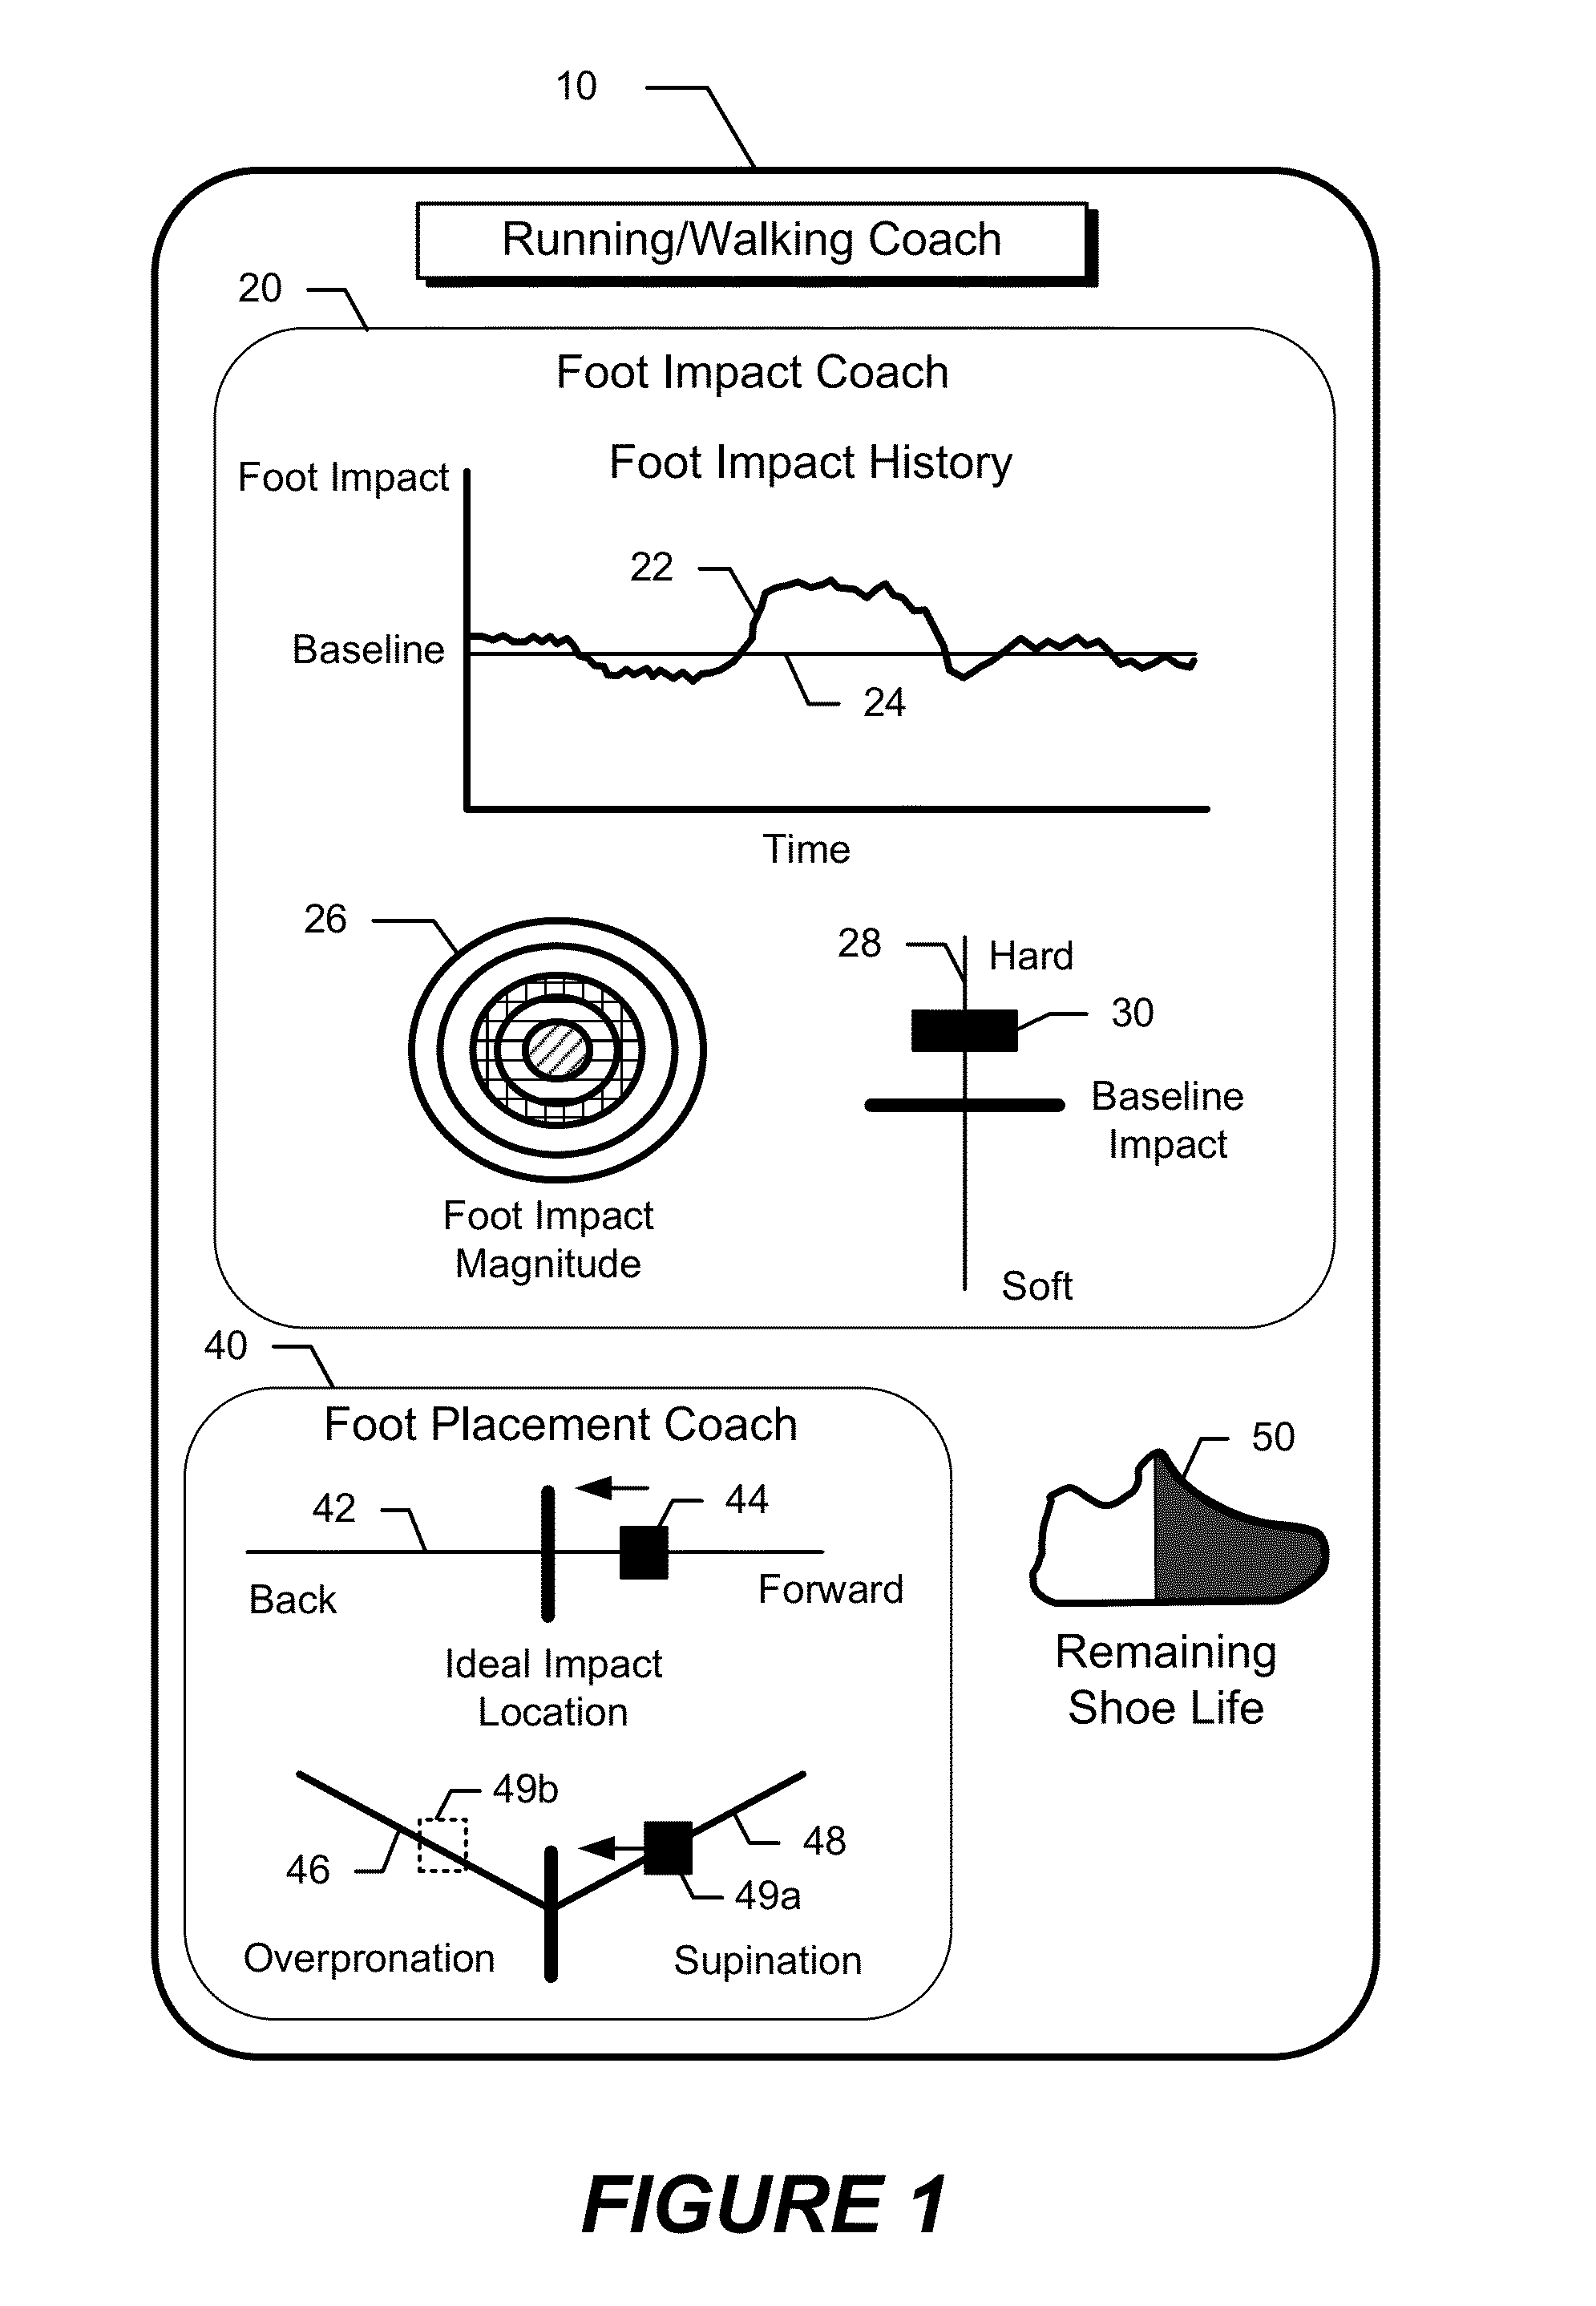 Circuits, systems, and methods for monitoring and coaching a person's sideways spacing foot placement and roll, shoe life, and other running/walking characteristics